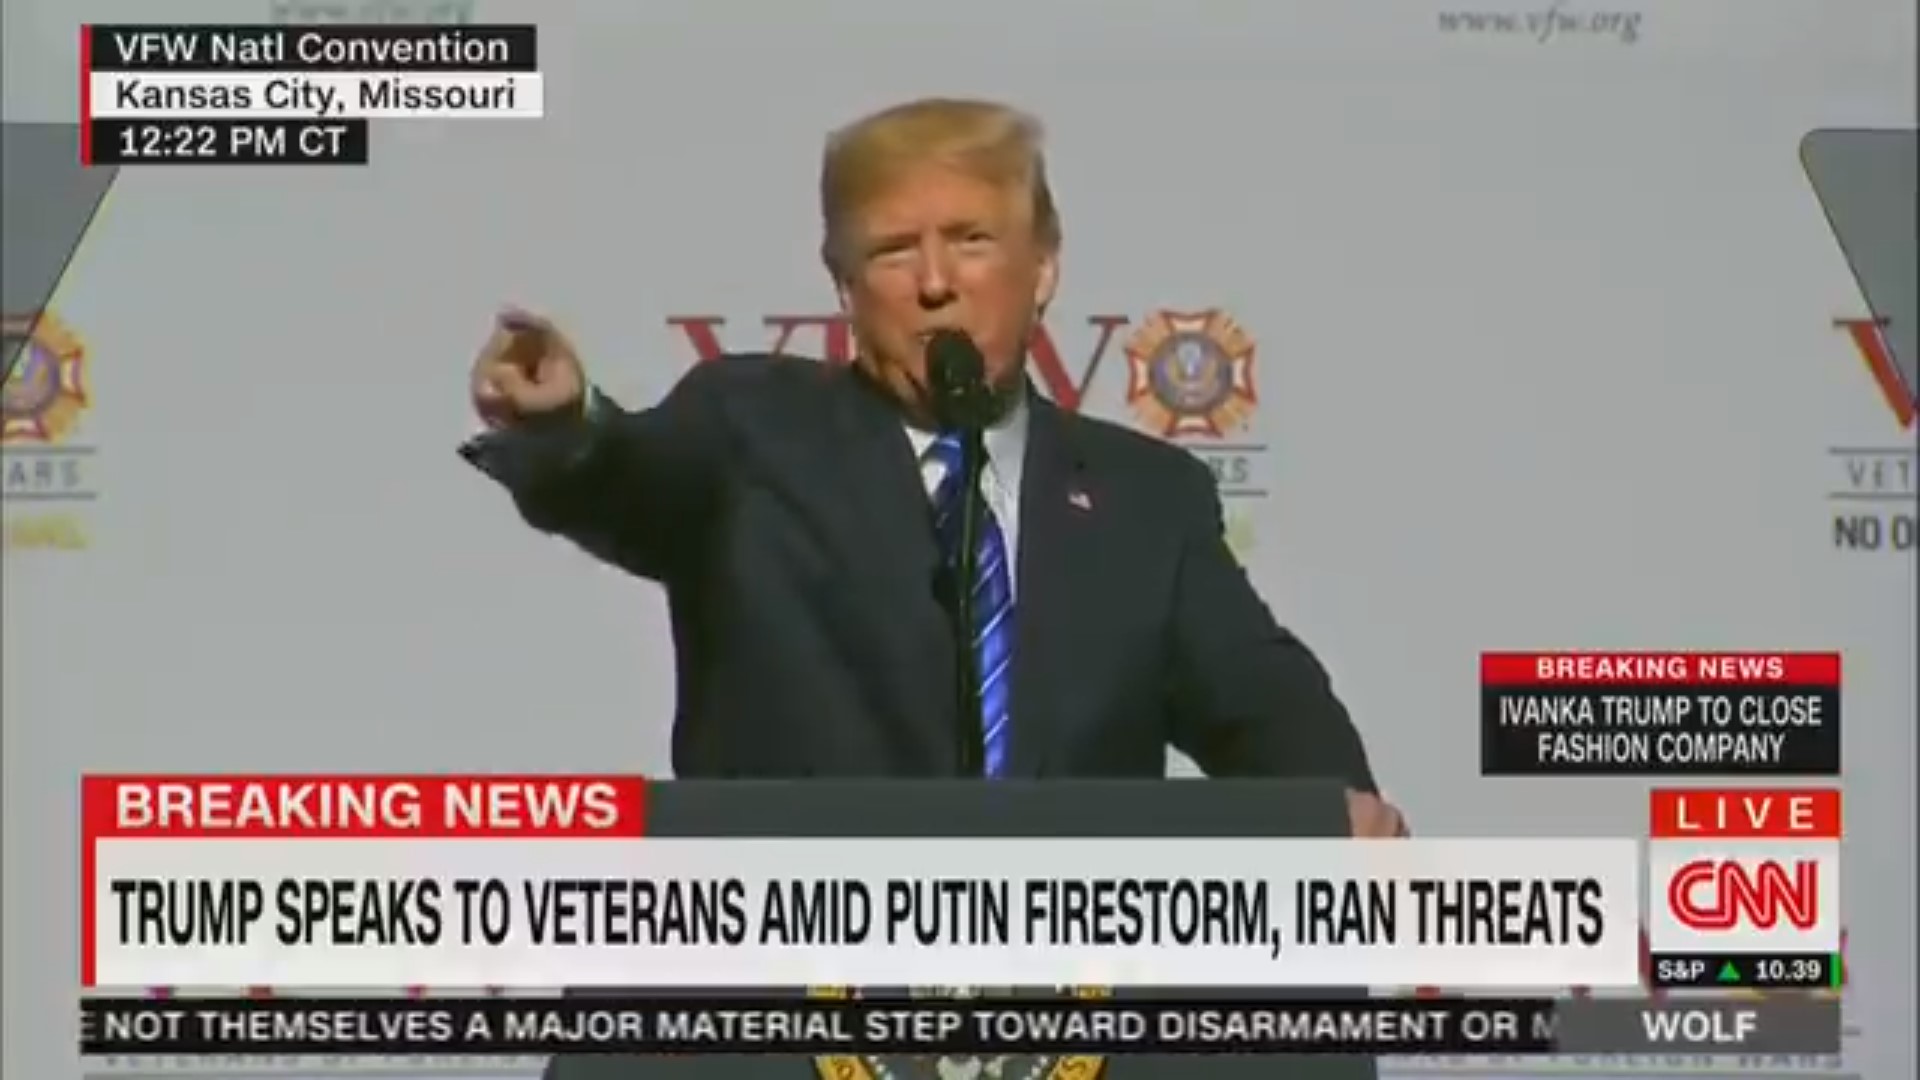 Trump Encourages Vets To Boo Media: ‘Don’t Believe The Crap You See From These People, The Fake News’